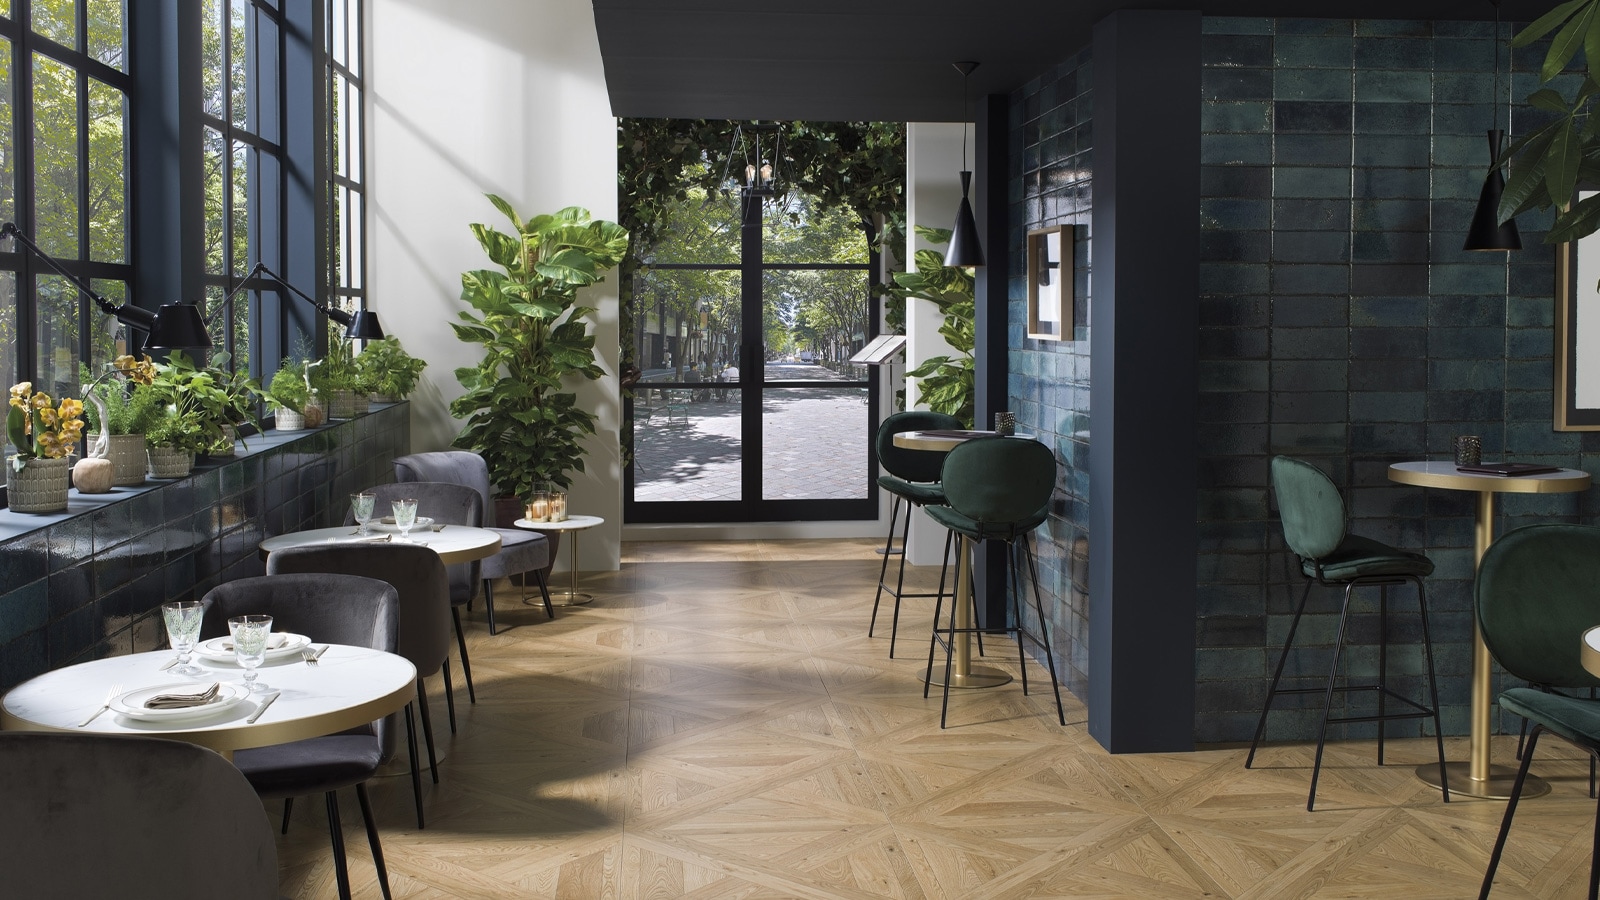 Porcelanosa’s volcanic and terrazzo stone lands at Cersaie 2021